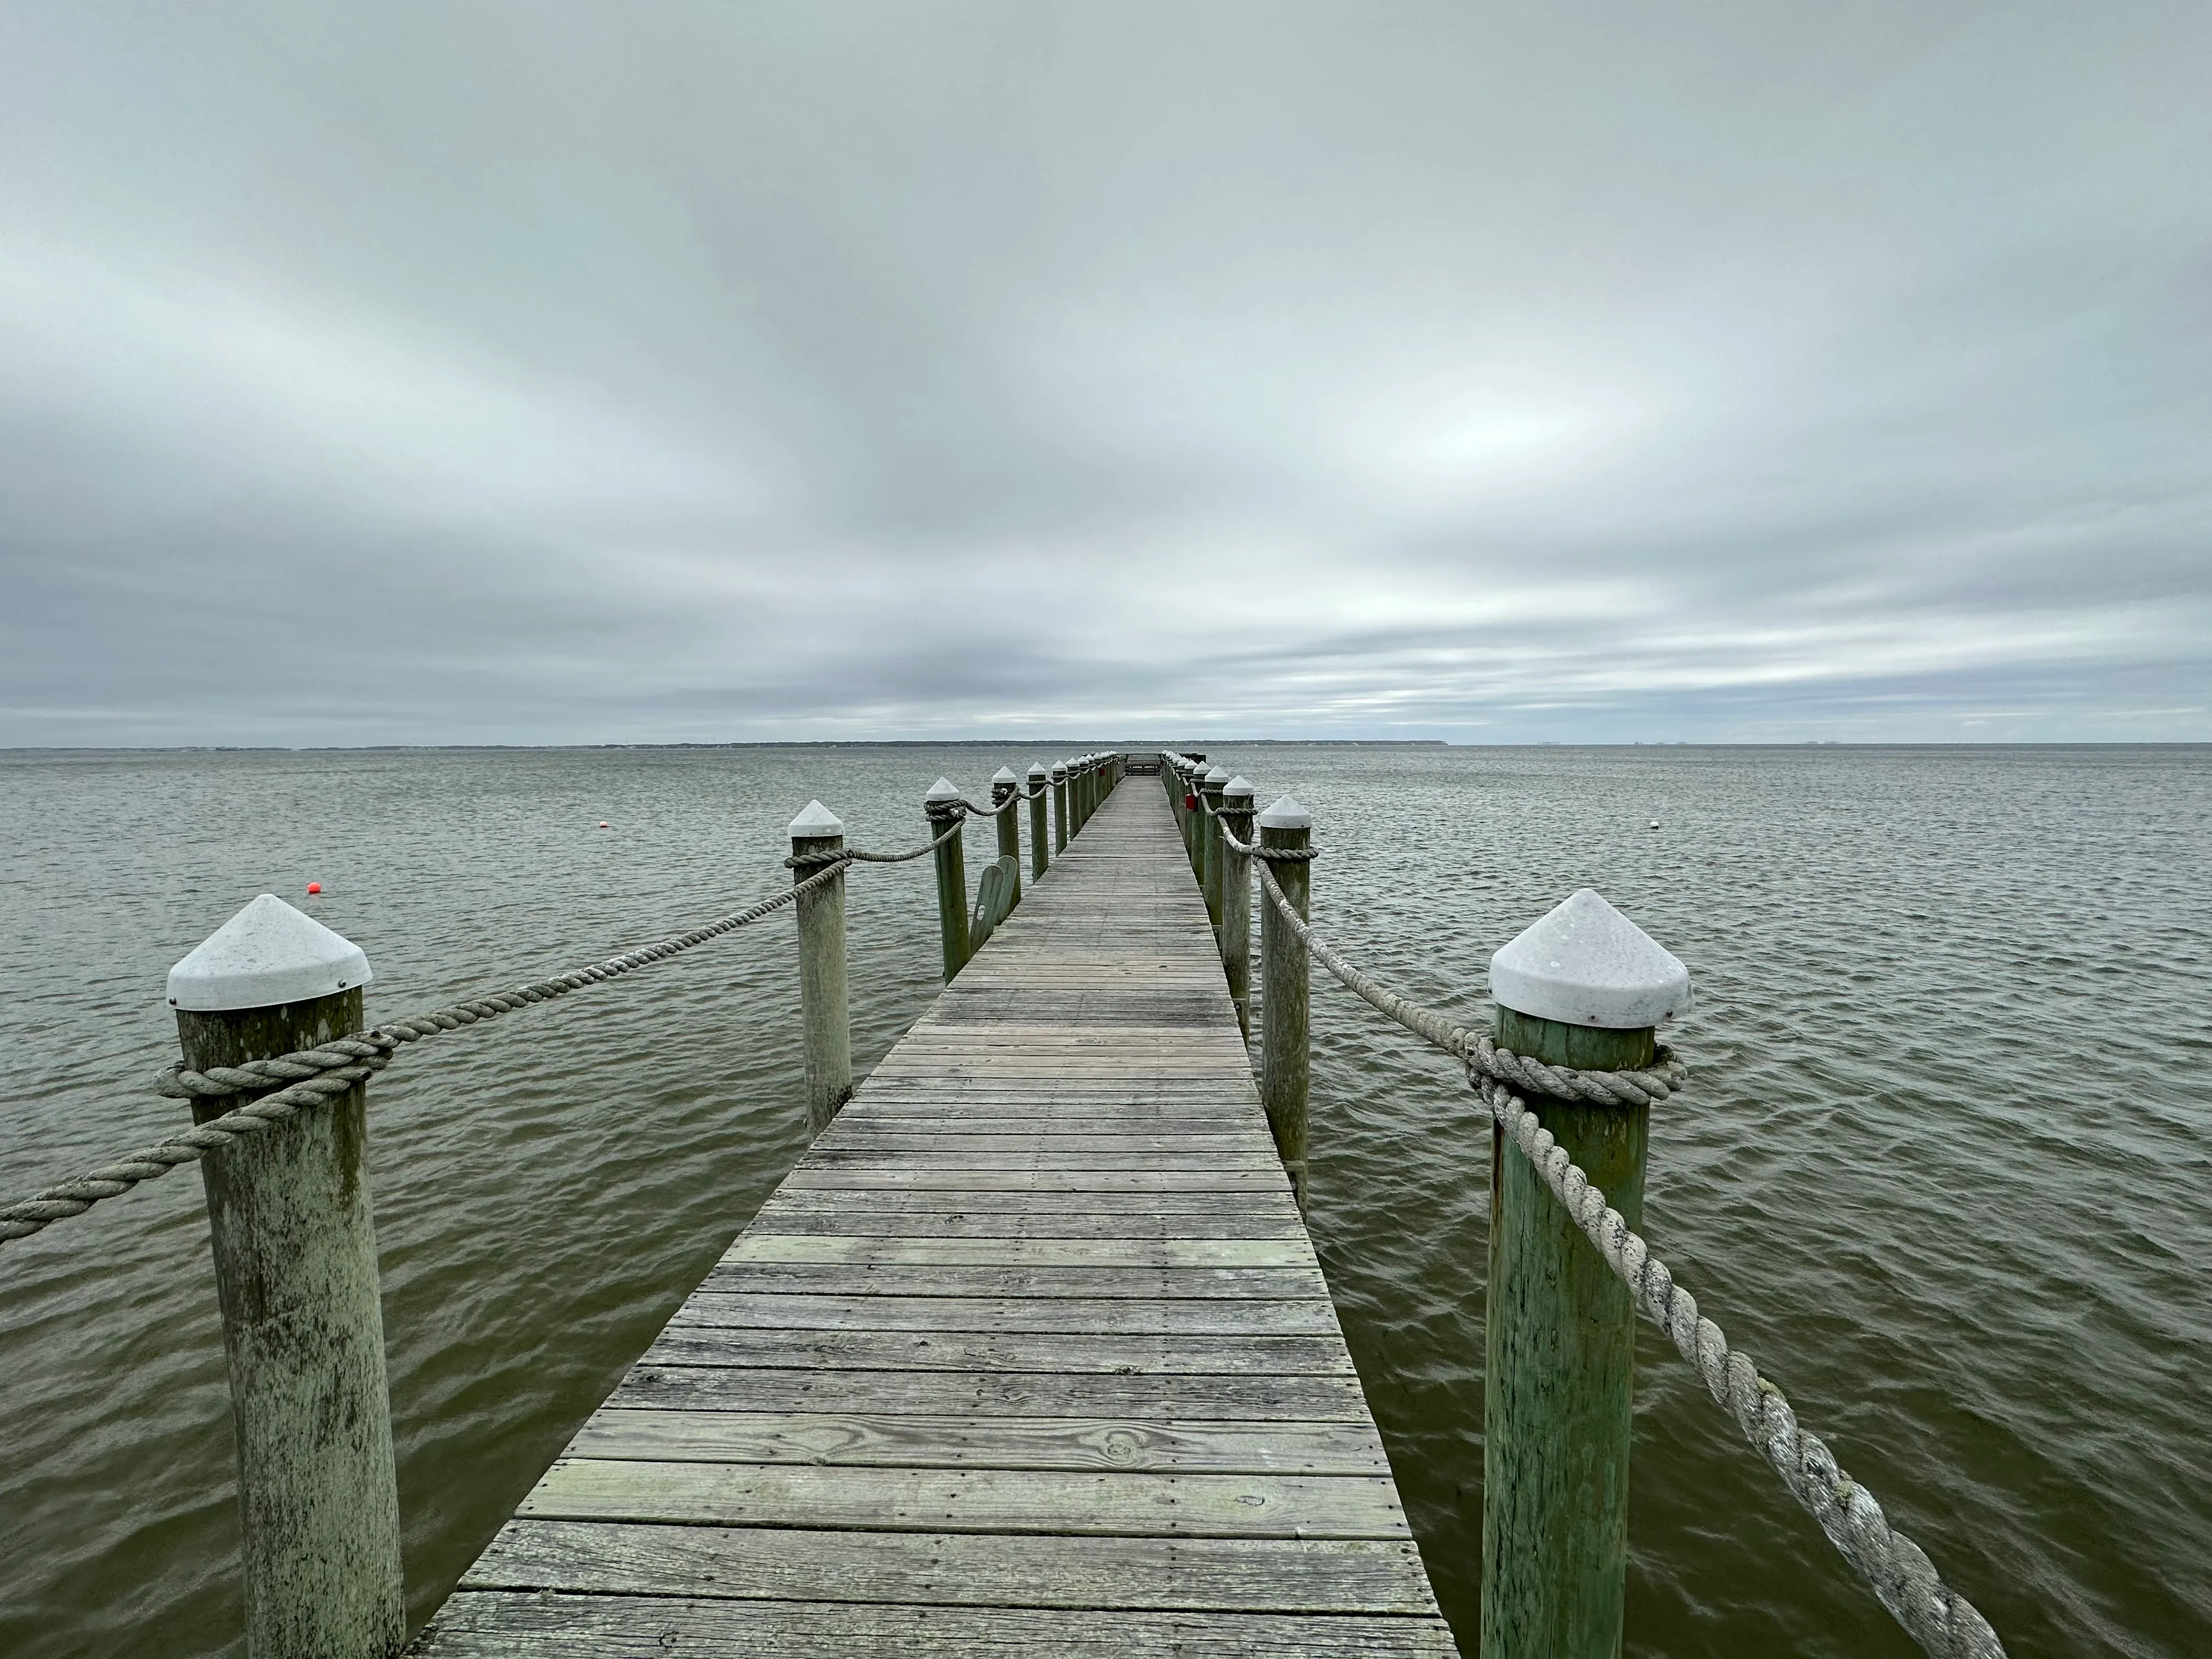 A weathered pier stretches out across a calm water in an overcast sky.